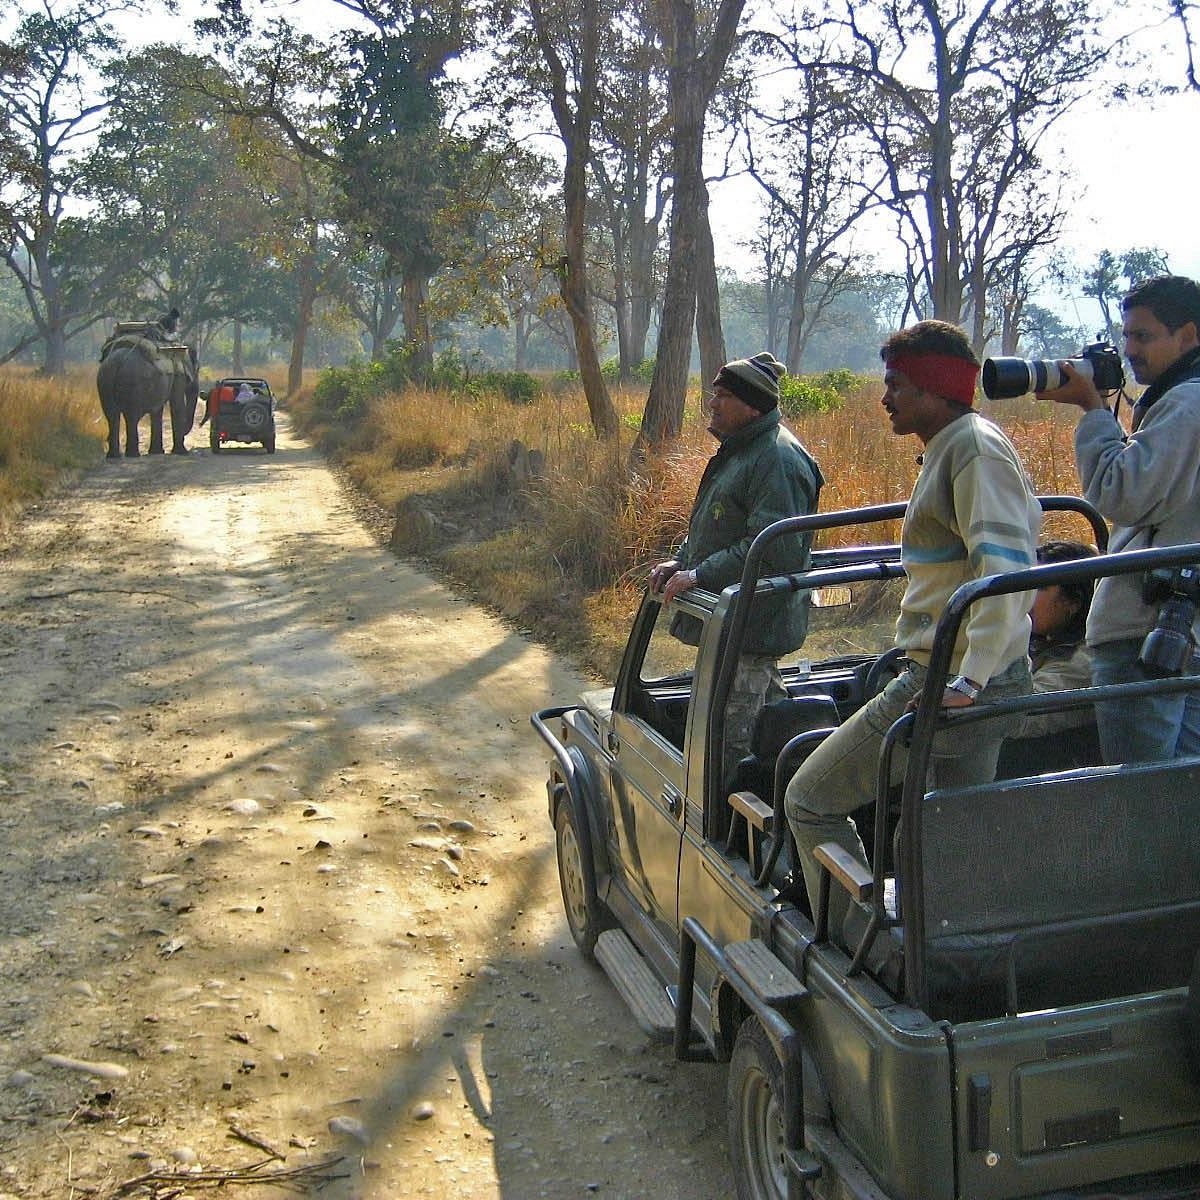 A group of people riding in a jeep on a dirt road, enjoying an adventurous journey through nature's rugged terrain.